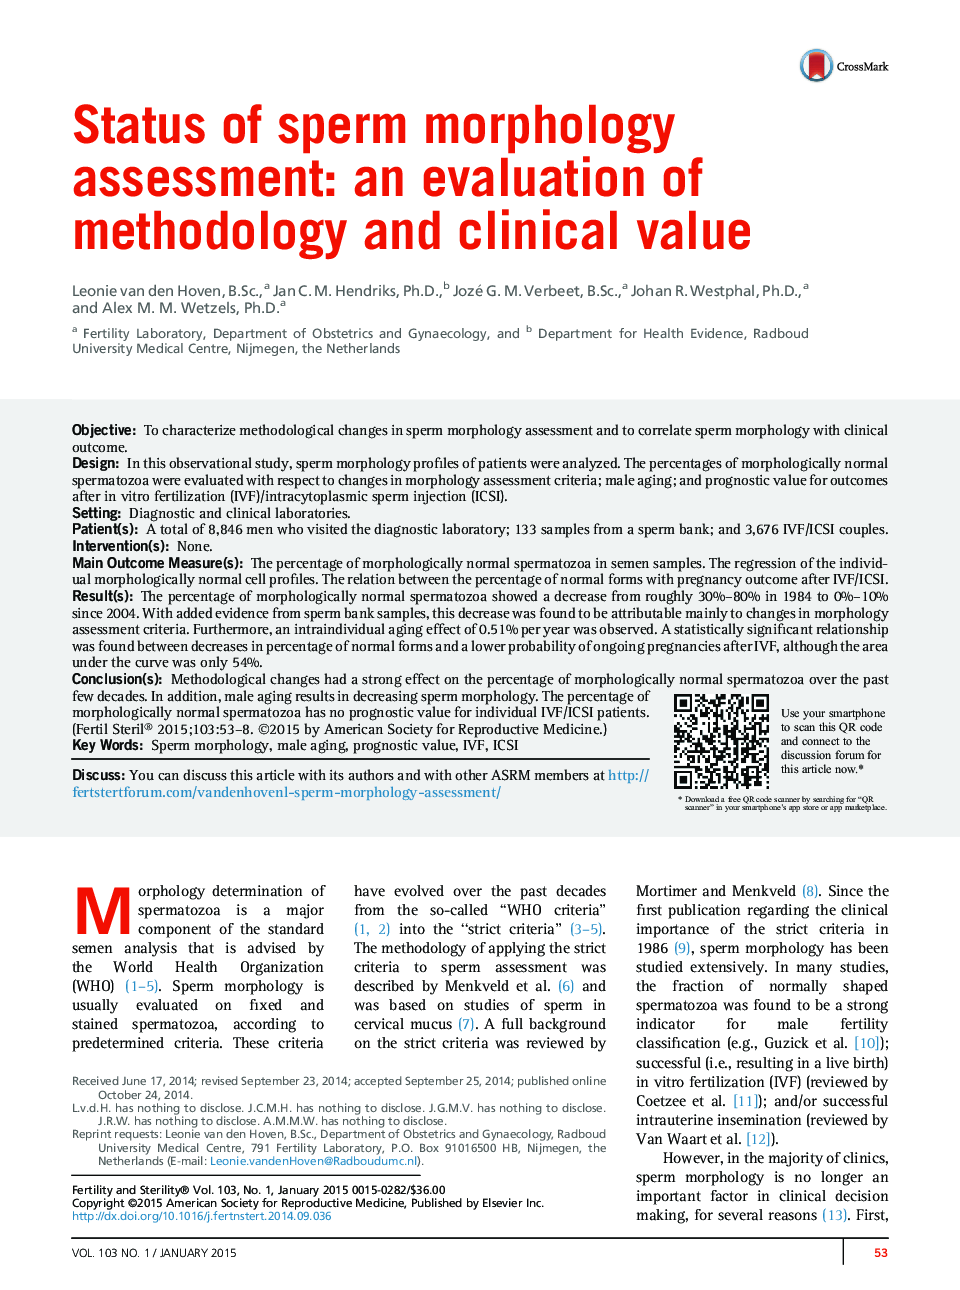 Status of sperm morphology assessment: an evaluation of methodology and clinical value